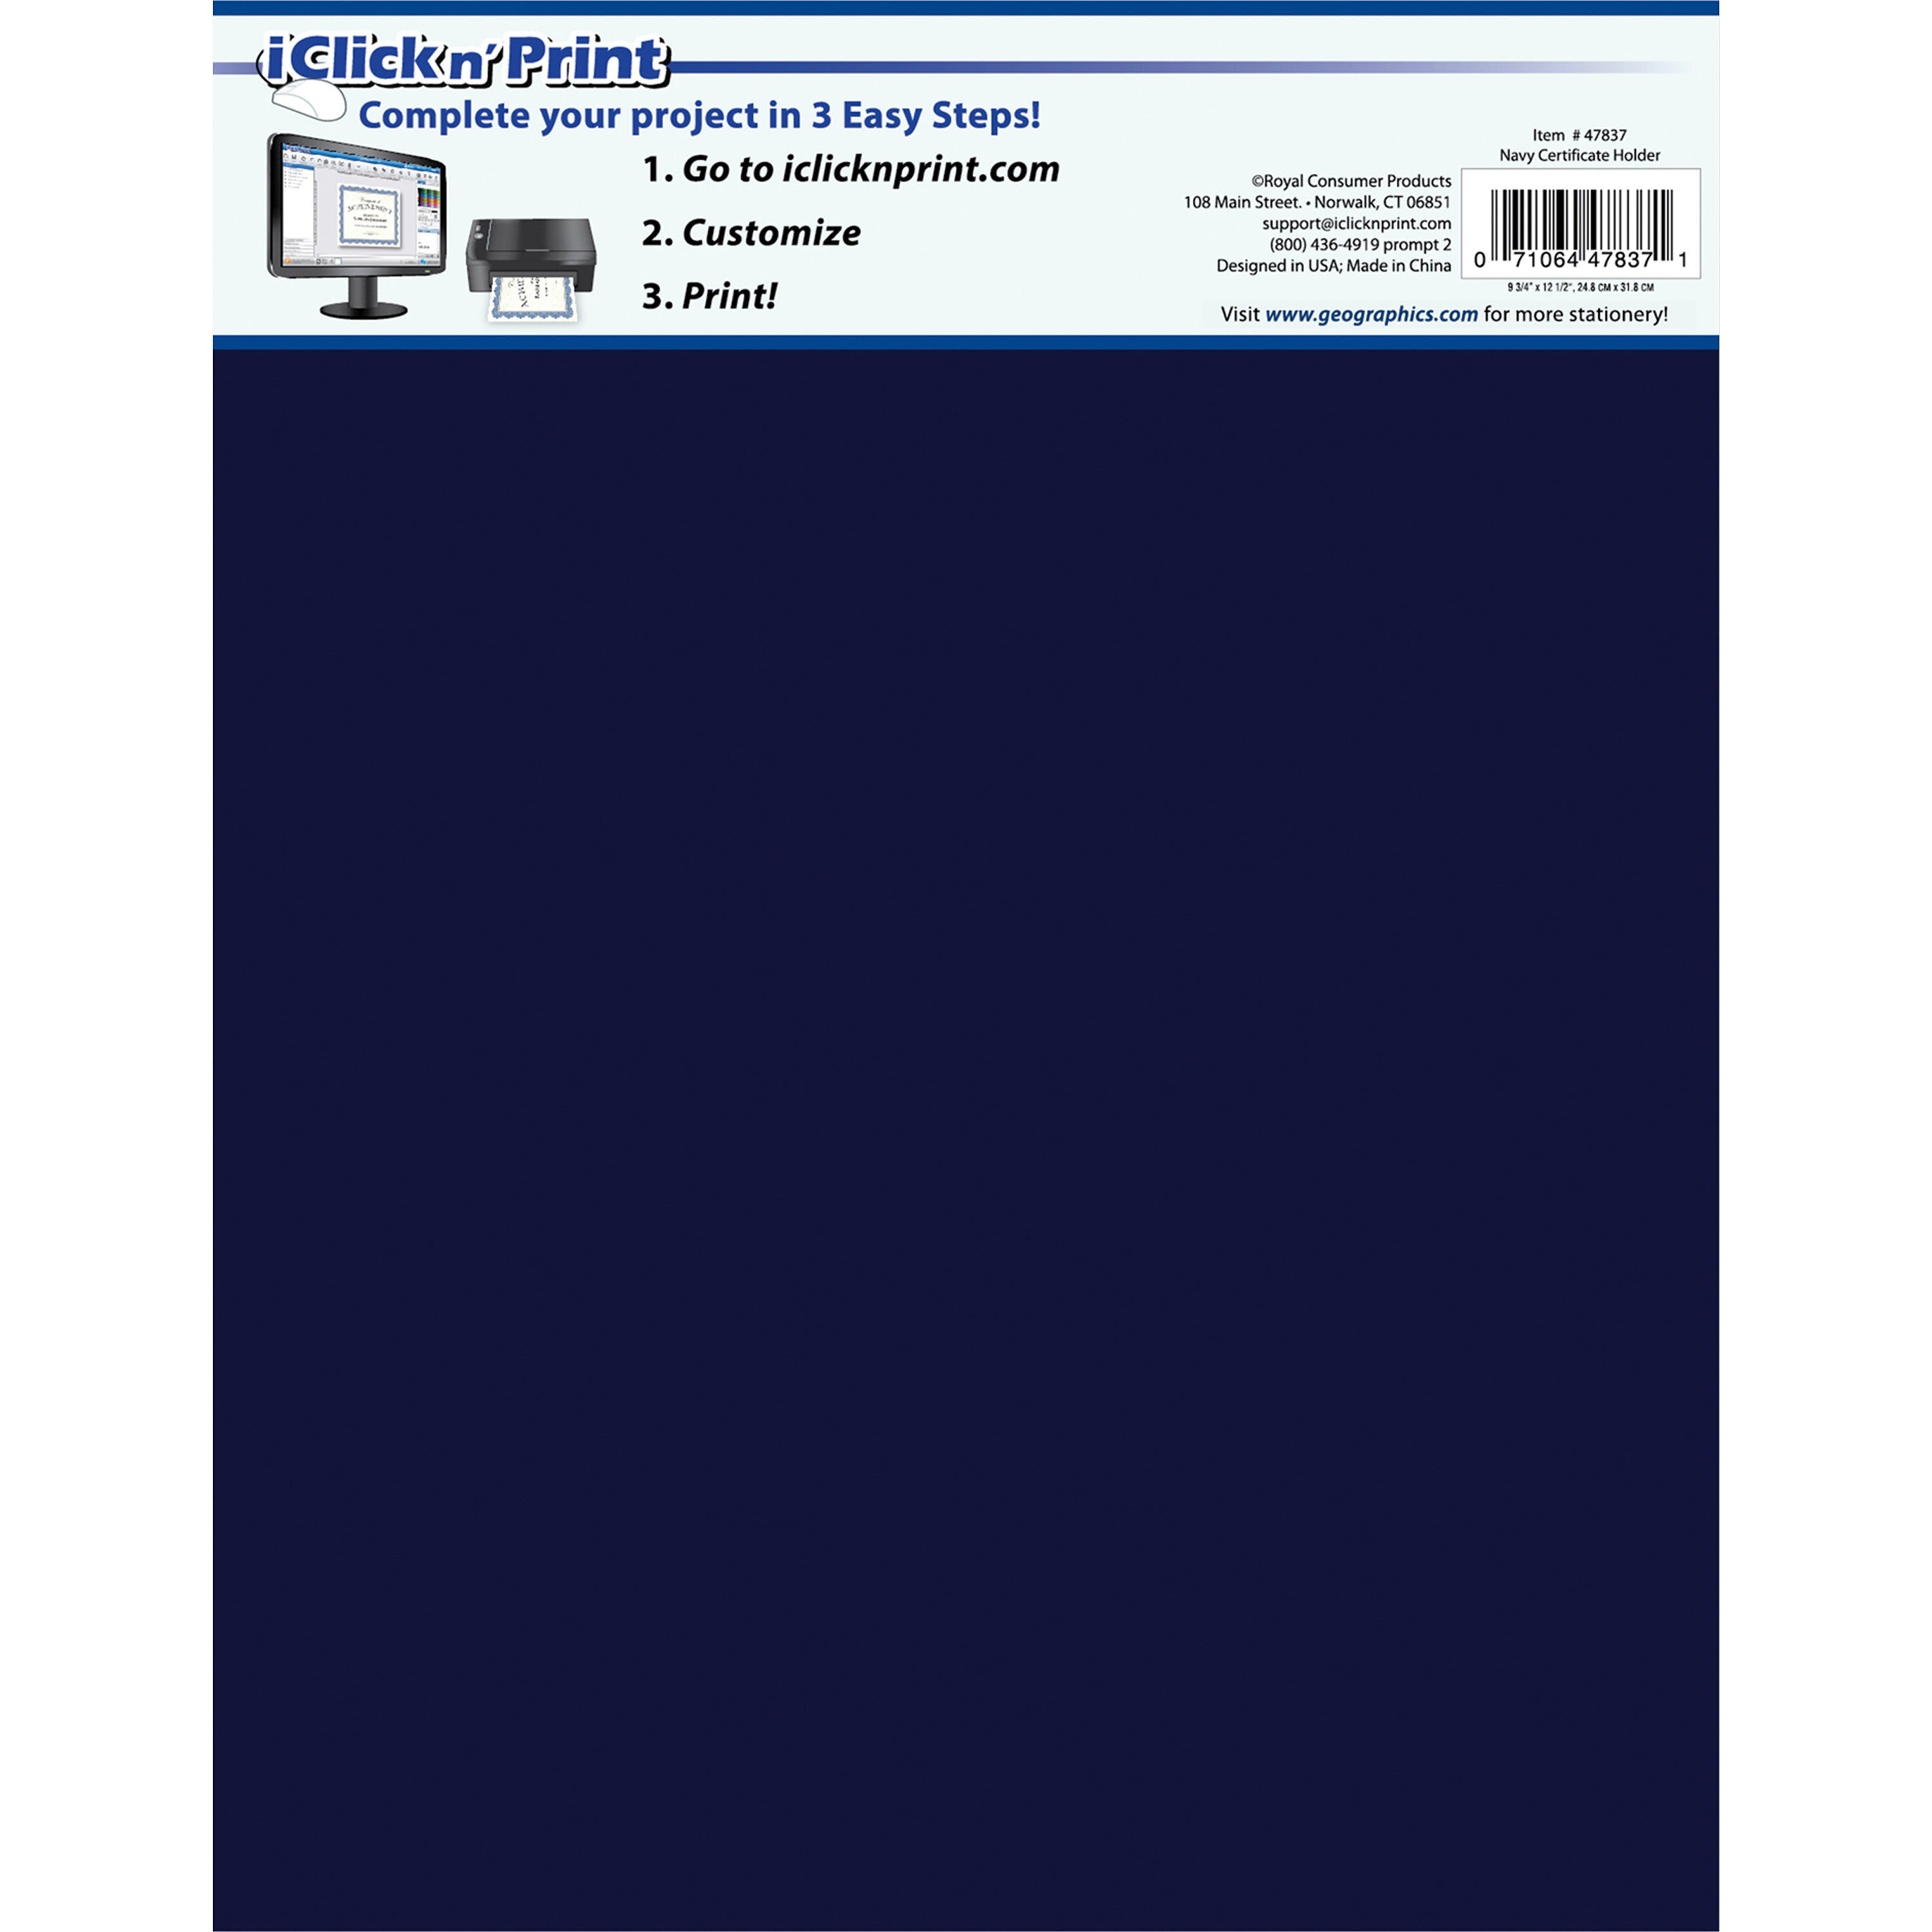 Geographics Recycled Certificate Holder - Navy - 30% Recycled - 5 / Pack - 